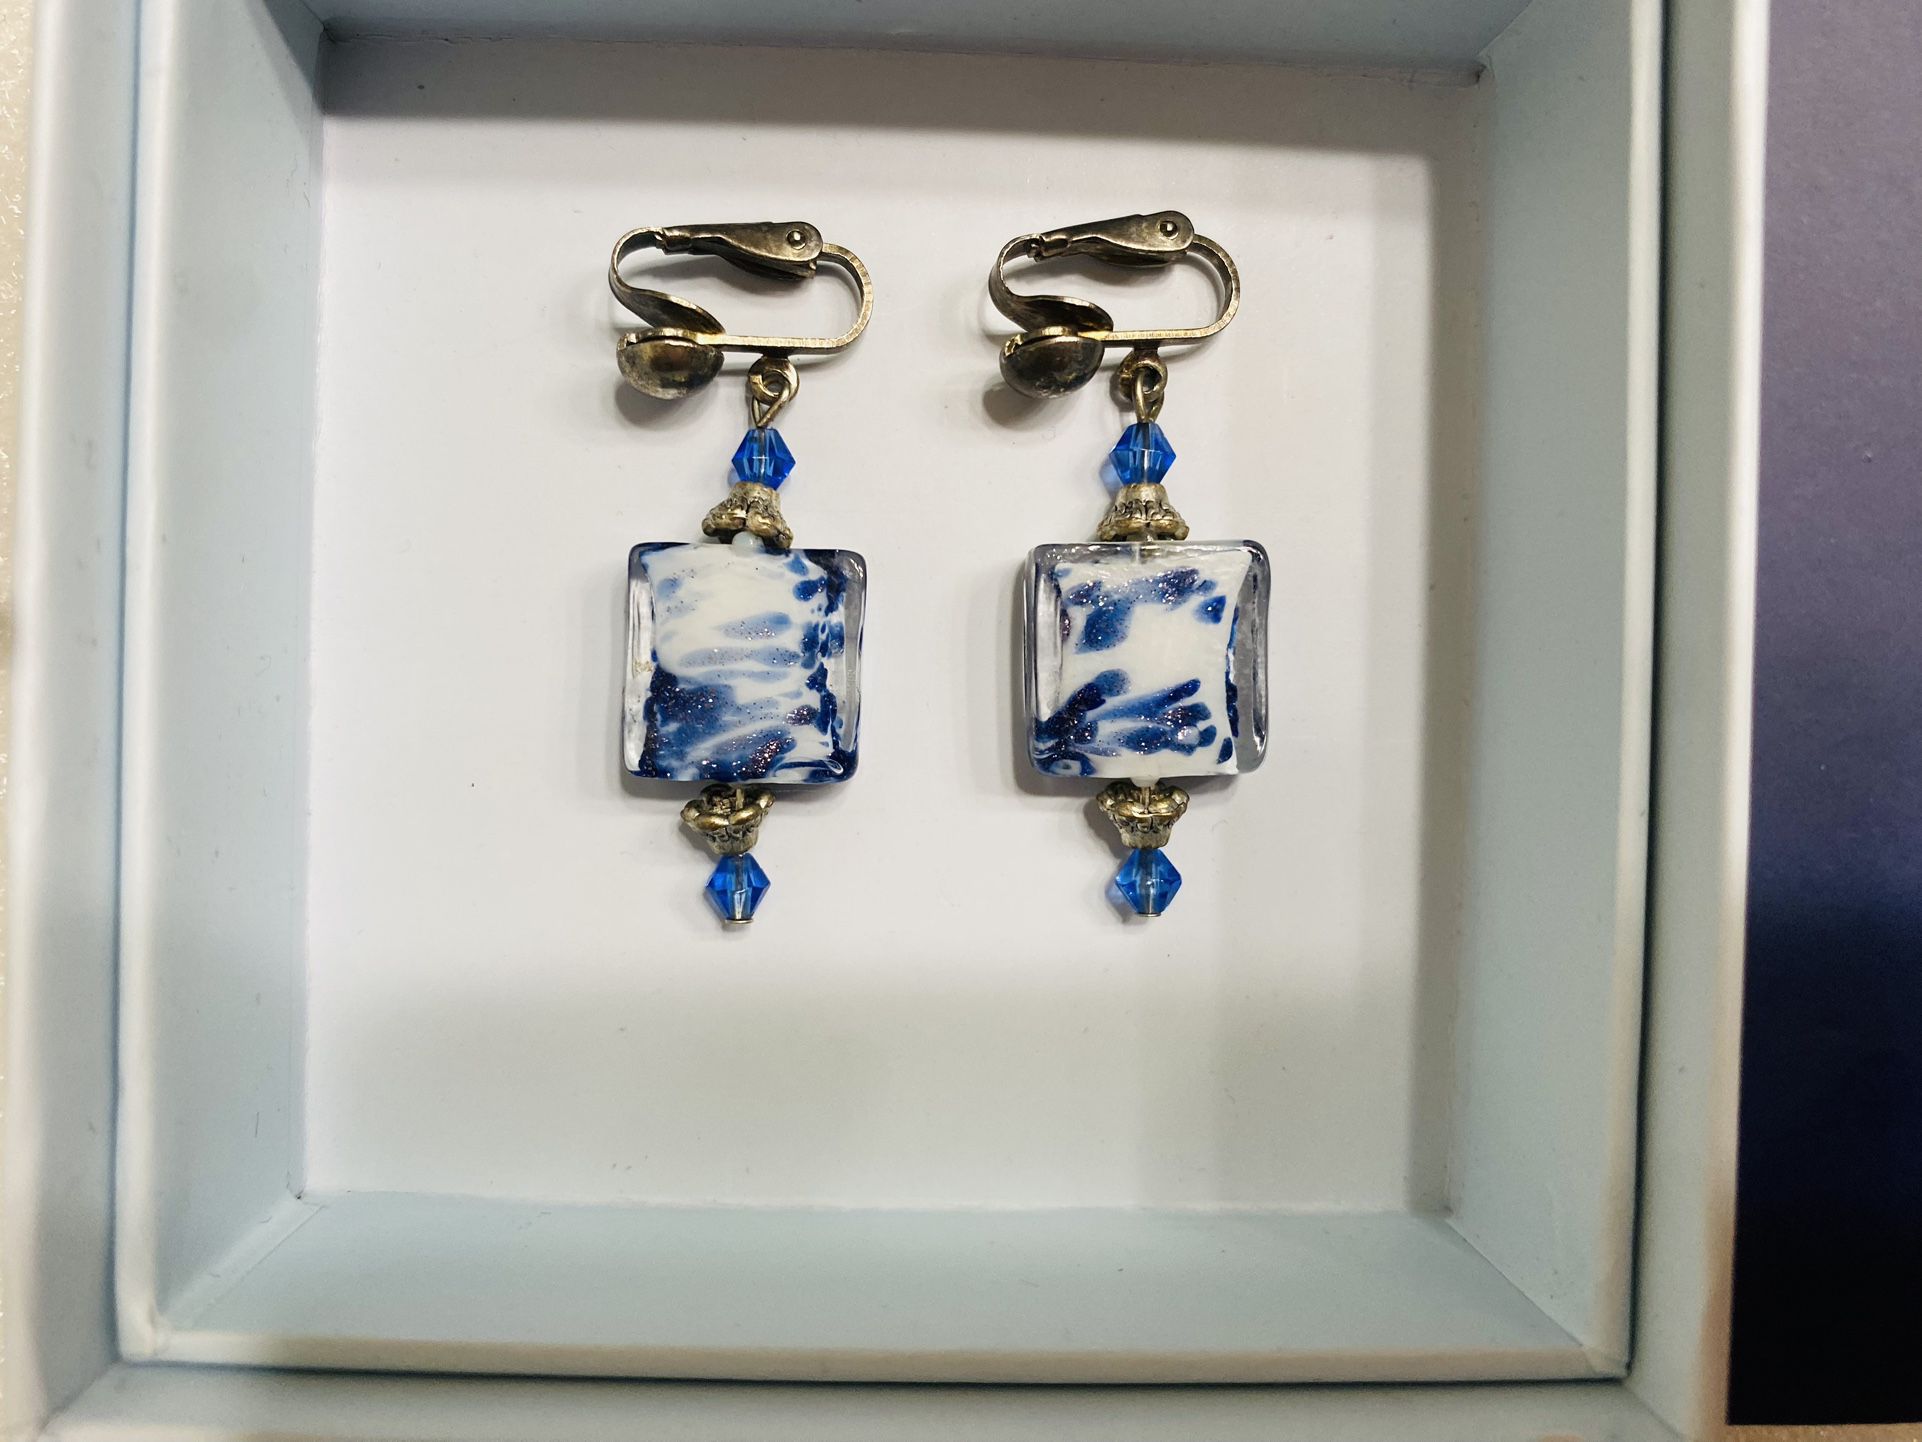 Gorgeous Blue & White Earrings- Great Mother's Day Gift!